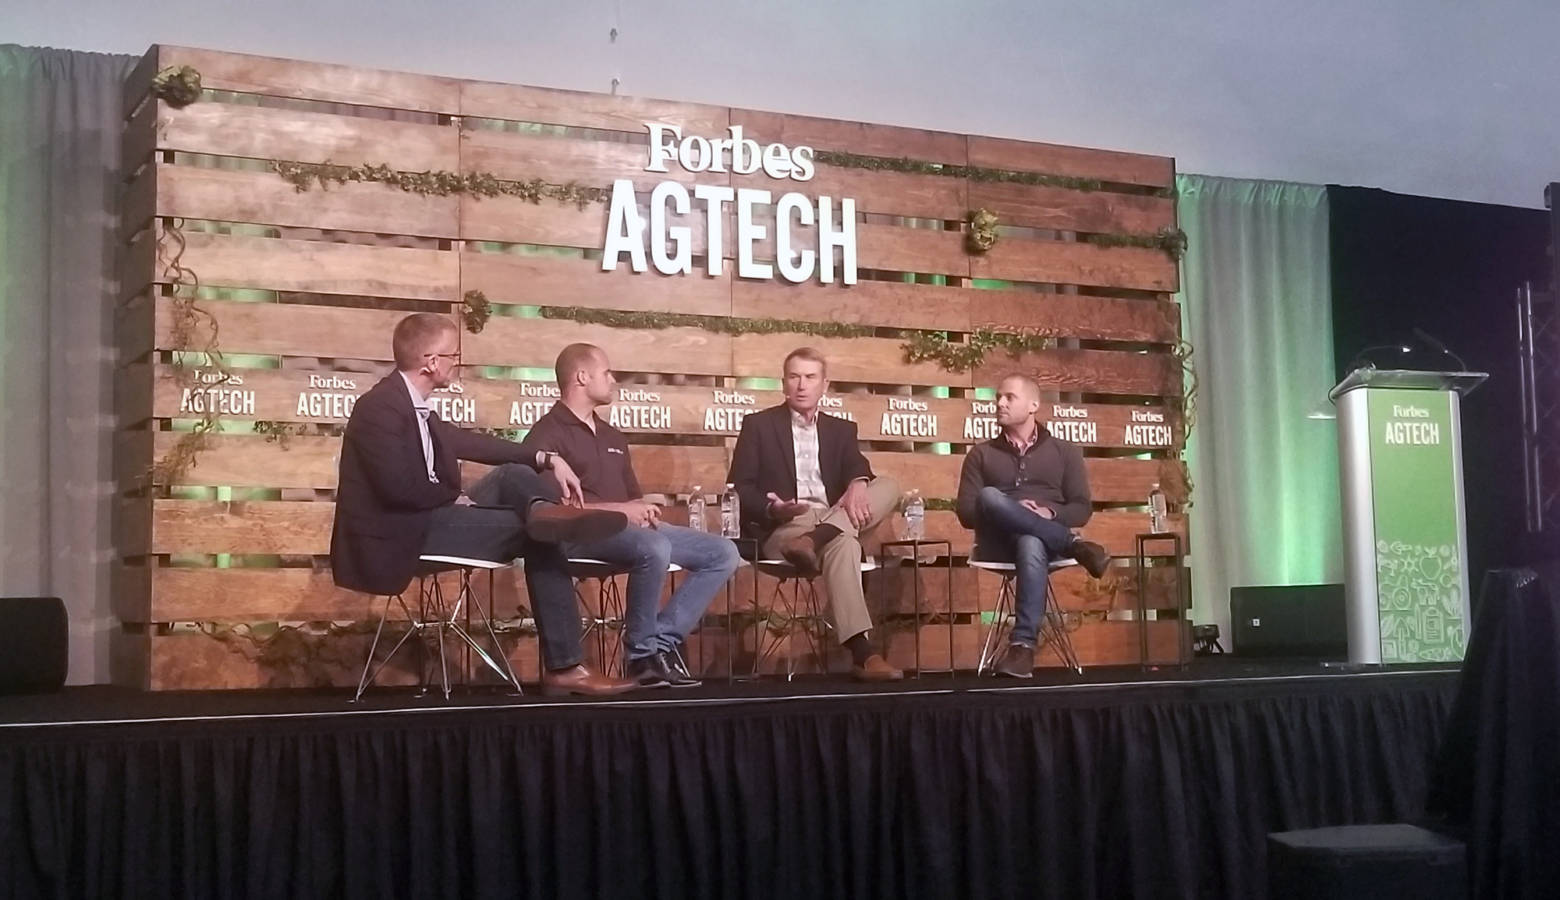 (From left to right) Reynolds Farm Equipment CEO Mitch Frazier talks with panelists AgNext CEO Troy Fiechter, farmer Jim Kline, and Taranis head of marketing Alex Whitley during Forbes AgTech Summit in Indianapolis. (Samantha Horton/IPB News)